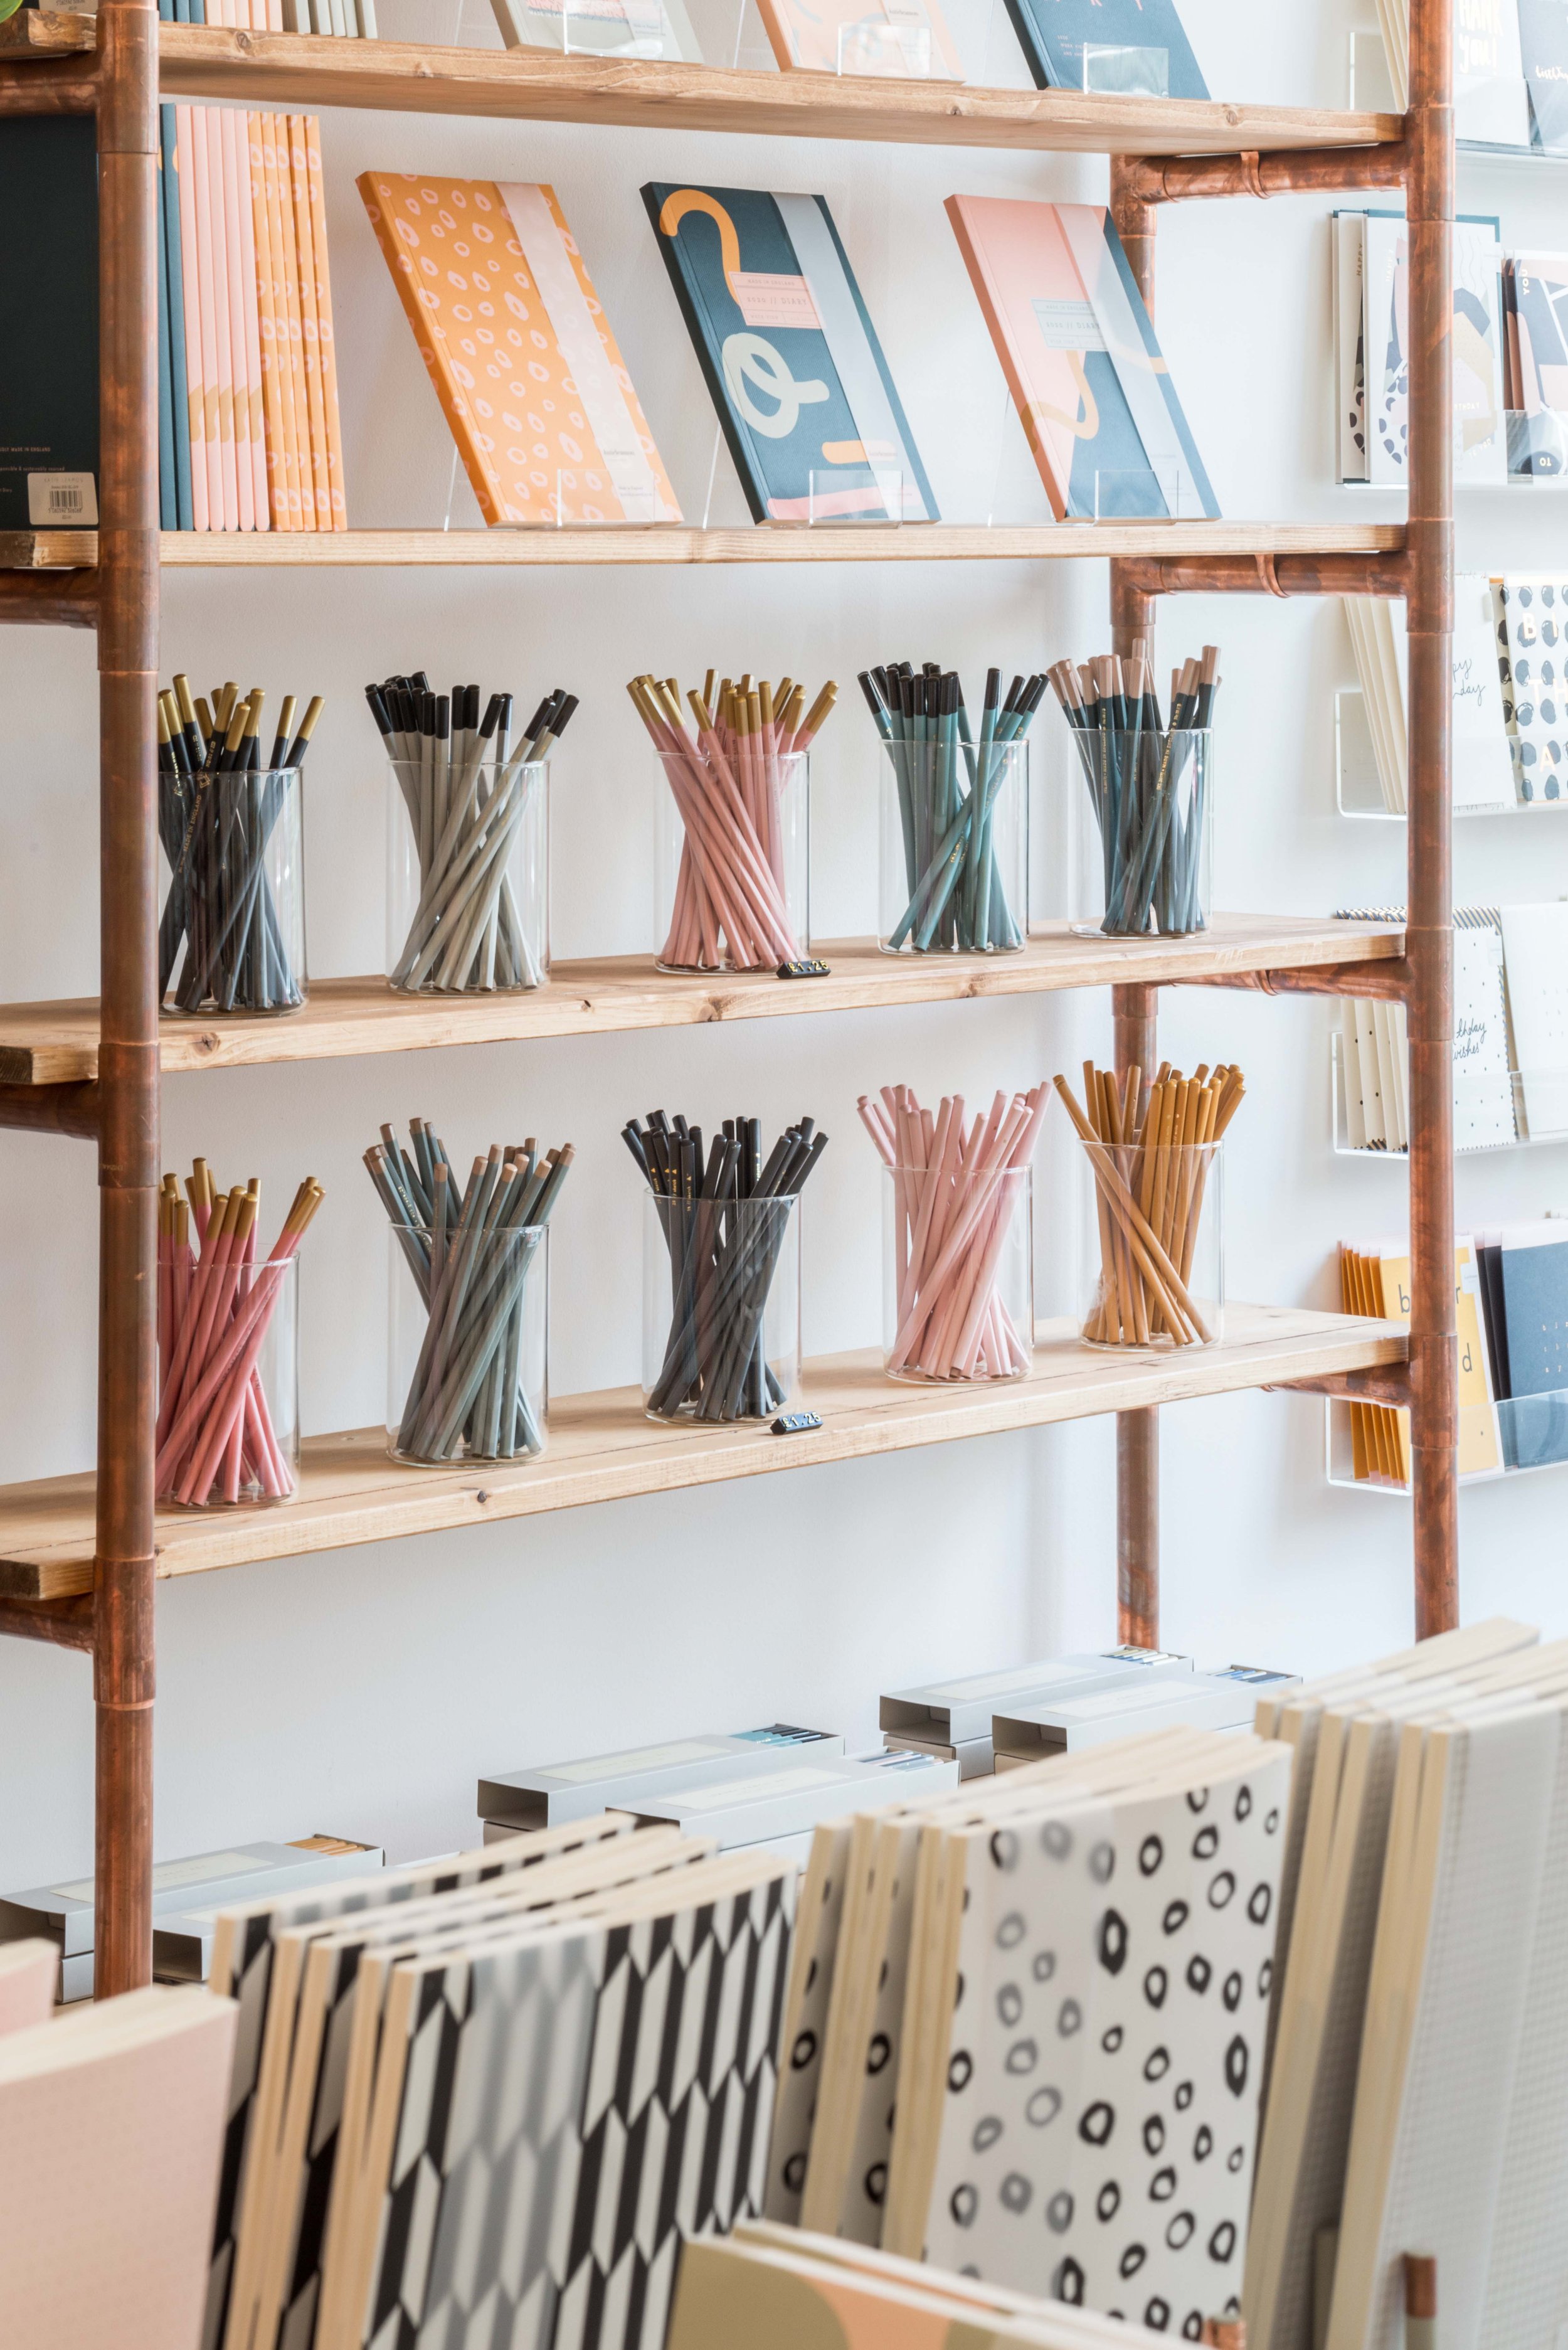 Shop shelving with pretty pencils and notebooks on display